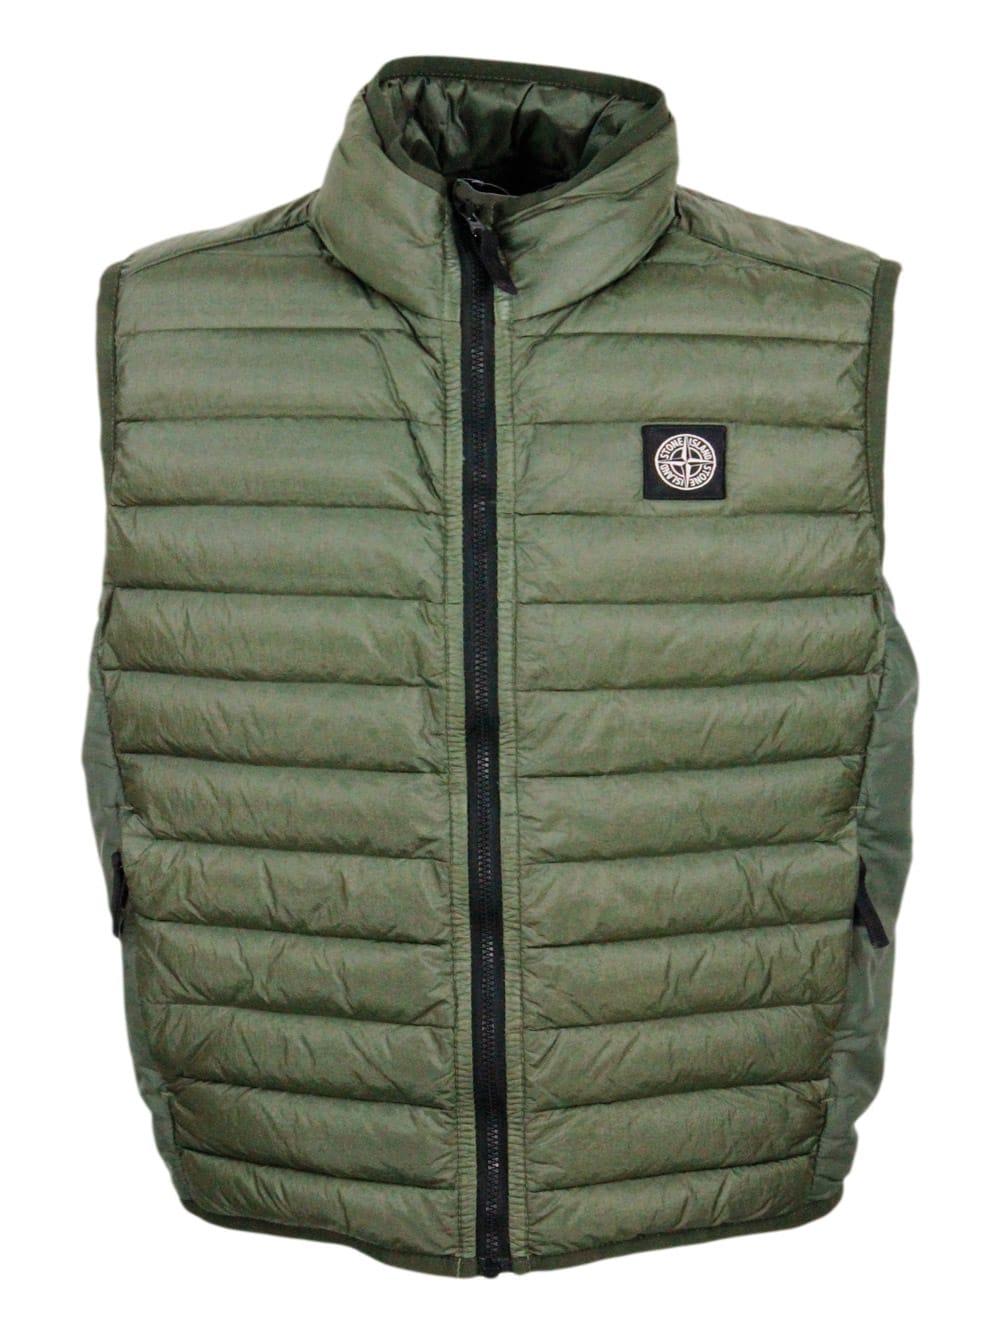 Stone Island Kids' 100 Gram Padded Sleeveless Down Vest Made Of Recycled Crisp Nylon. Zip Closure And Logo On The Chest In Military